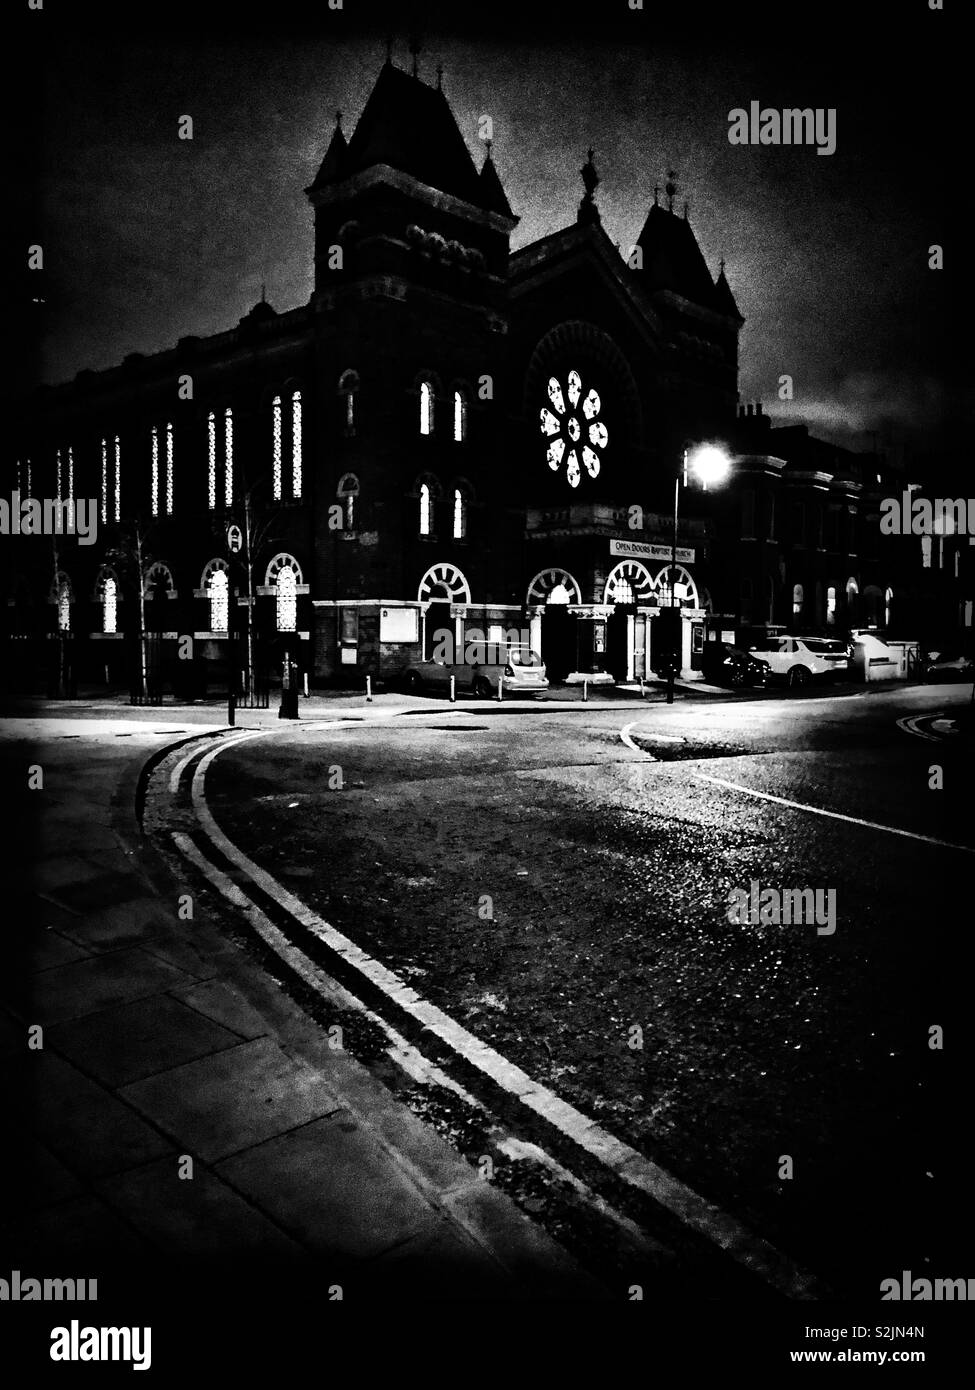 High contrast image of a Baptist a church I Hackney London UK photographed at night Stock Photo